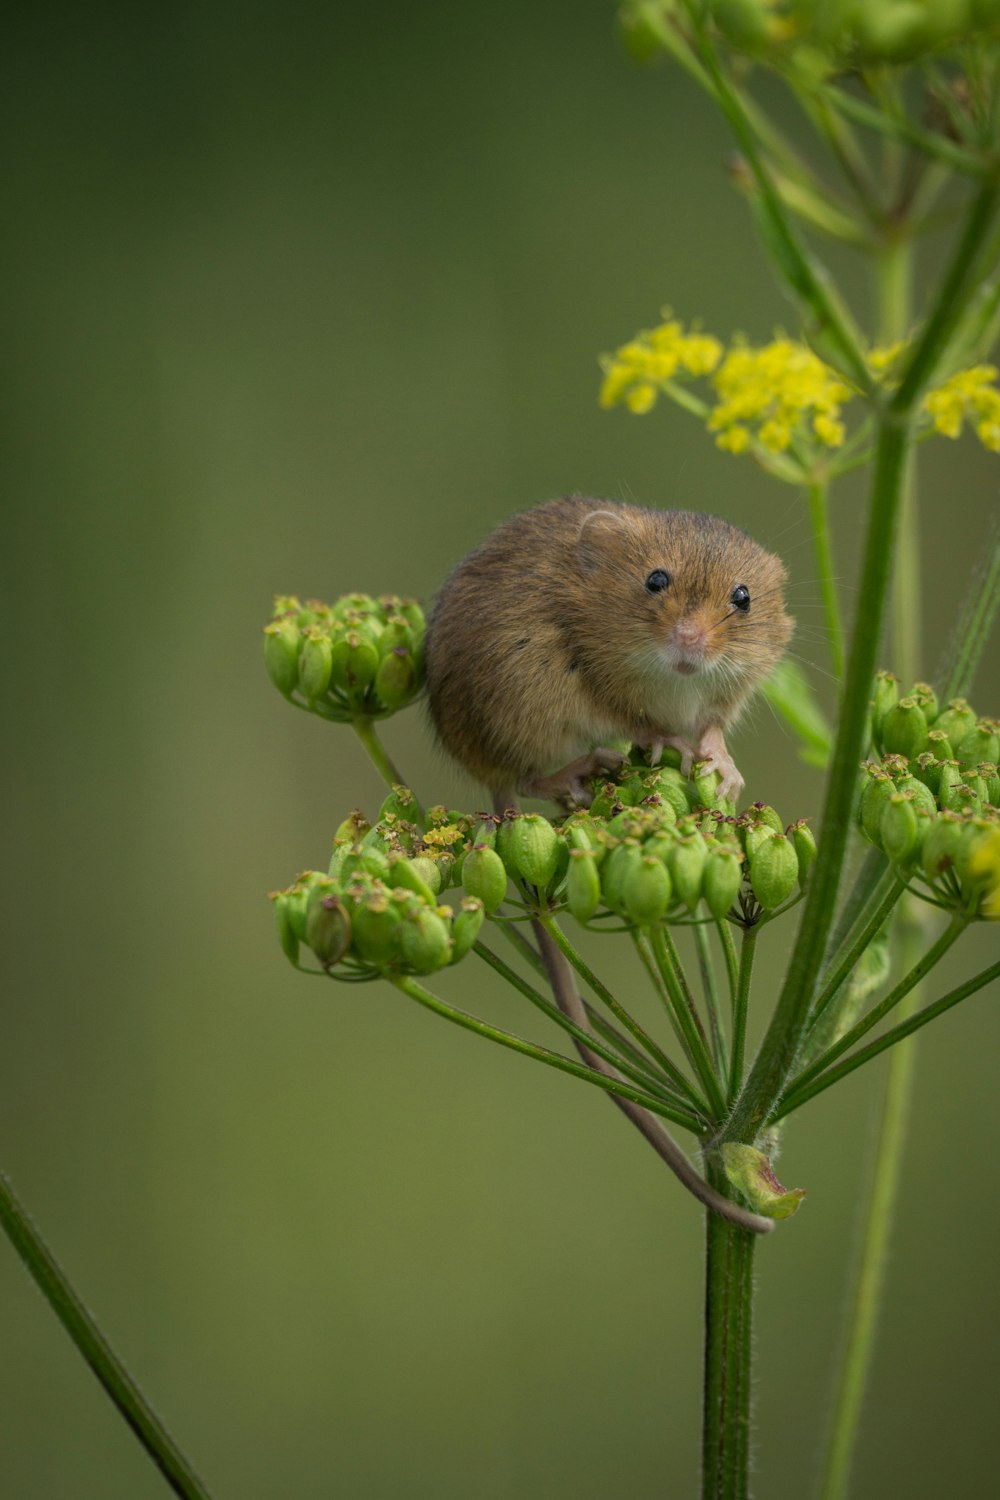 brown and white rodent on yellow flower